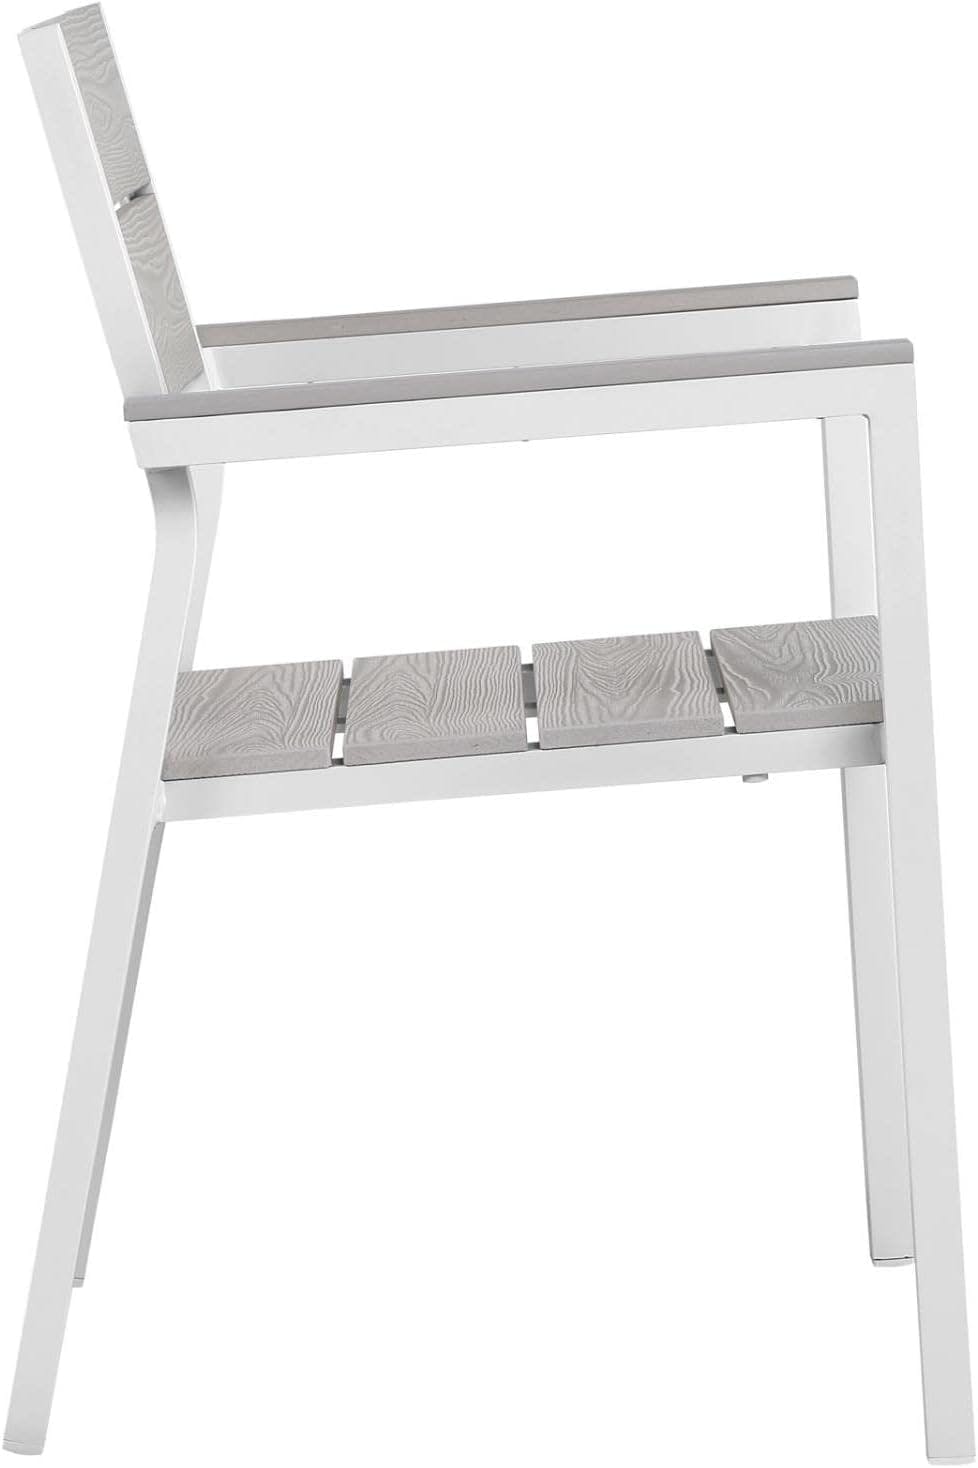 Maine White & Light Gray Aluminum Outdoor Patio Dining Chair